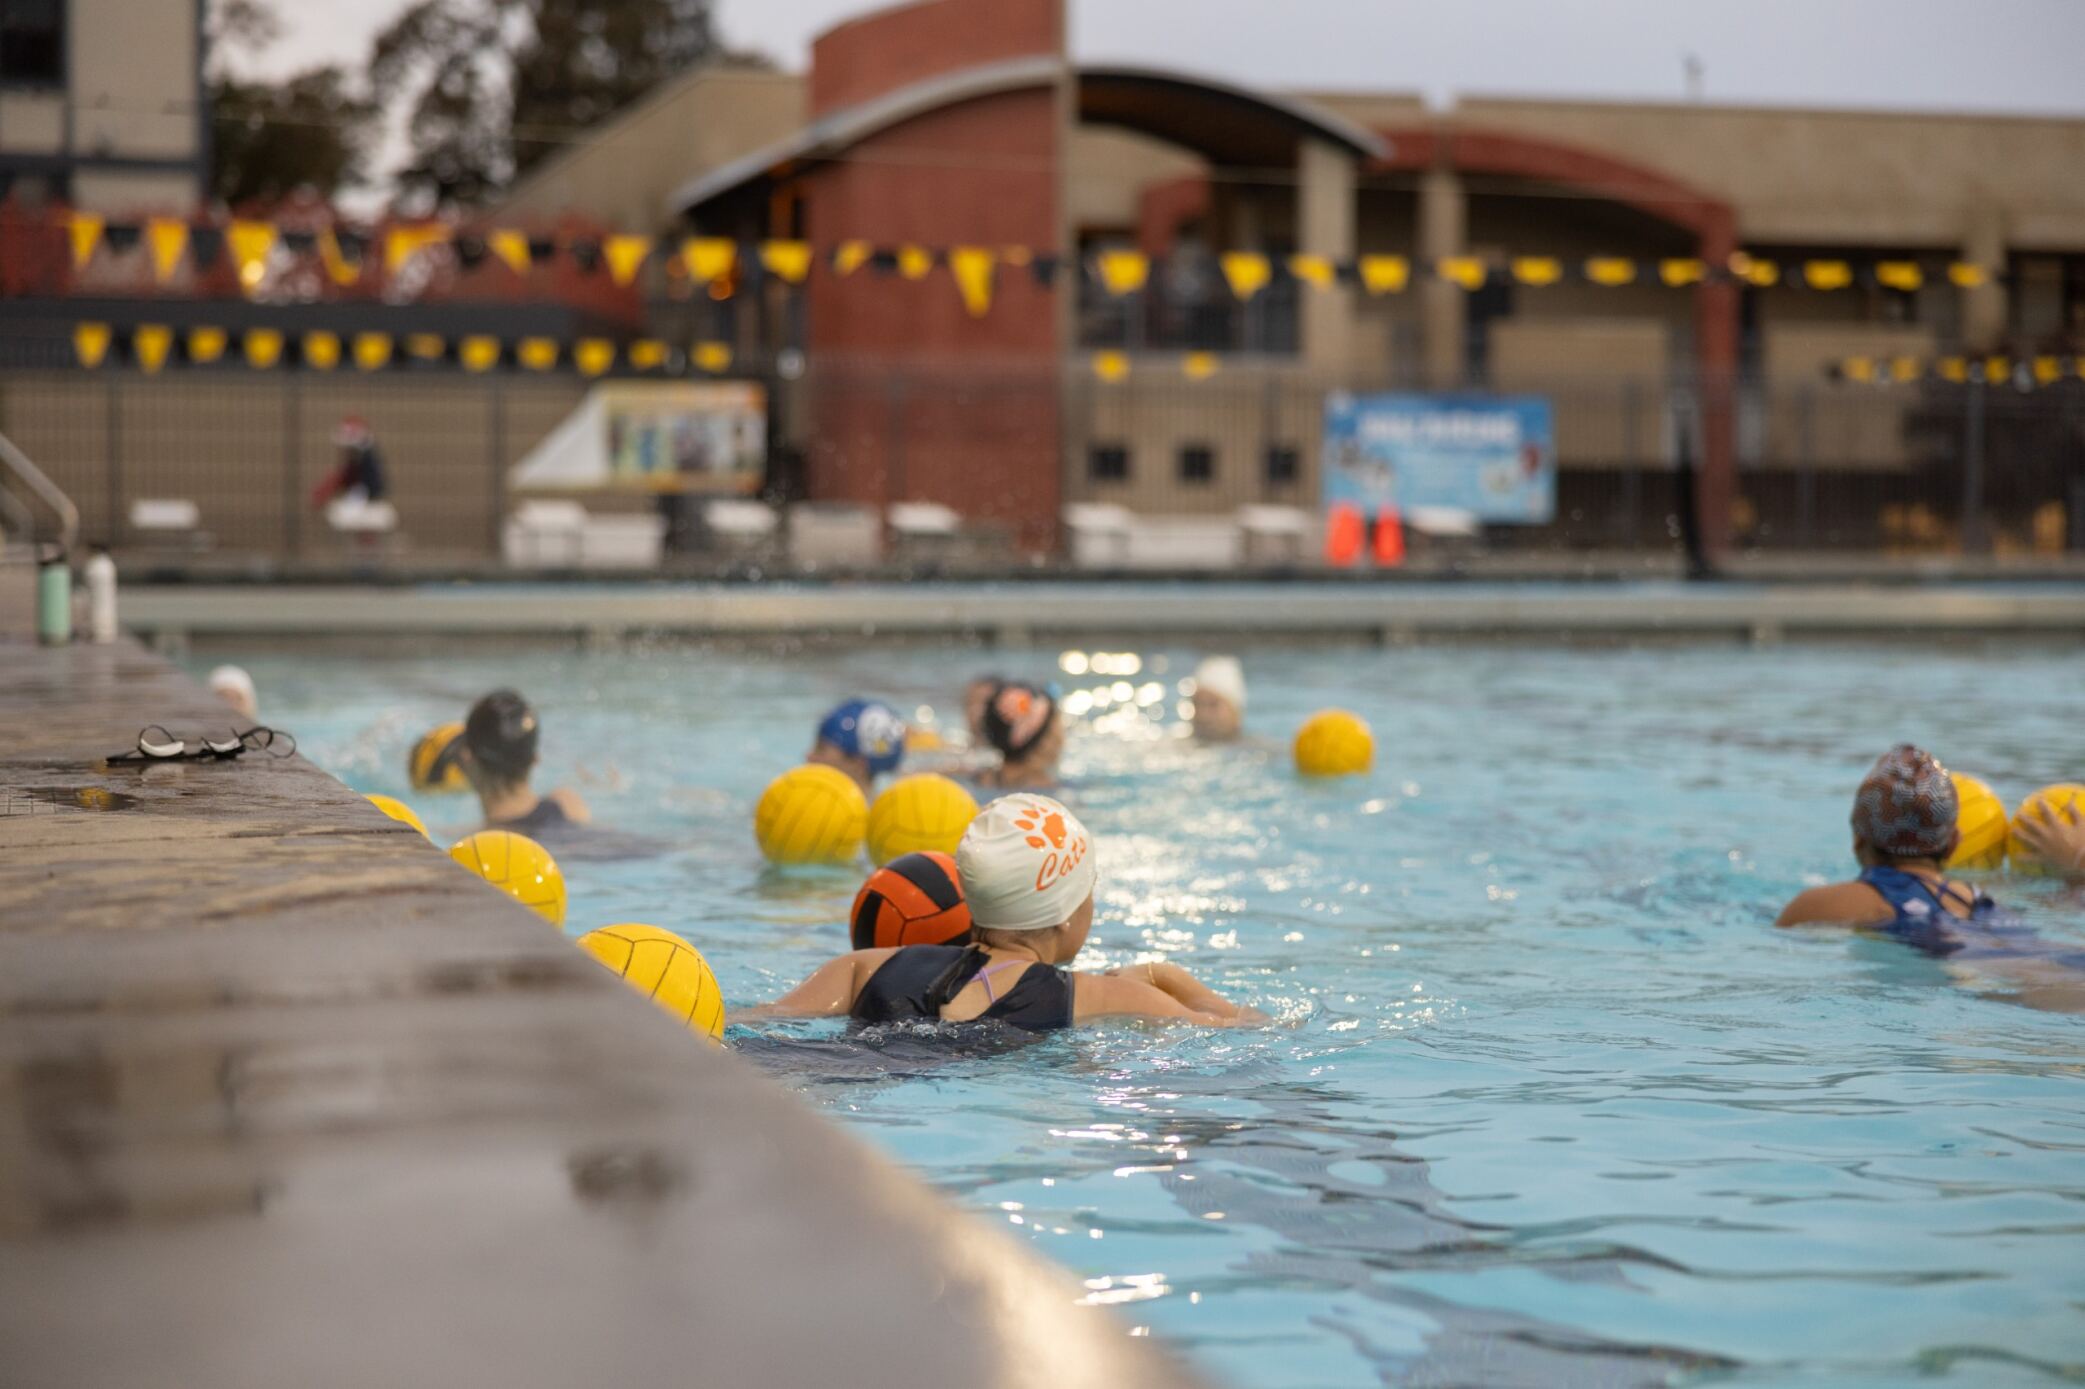 Swimmers in the pool playing water polo